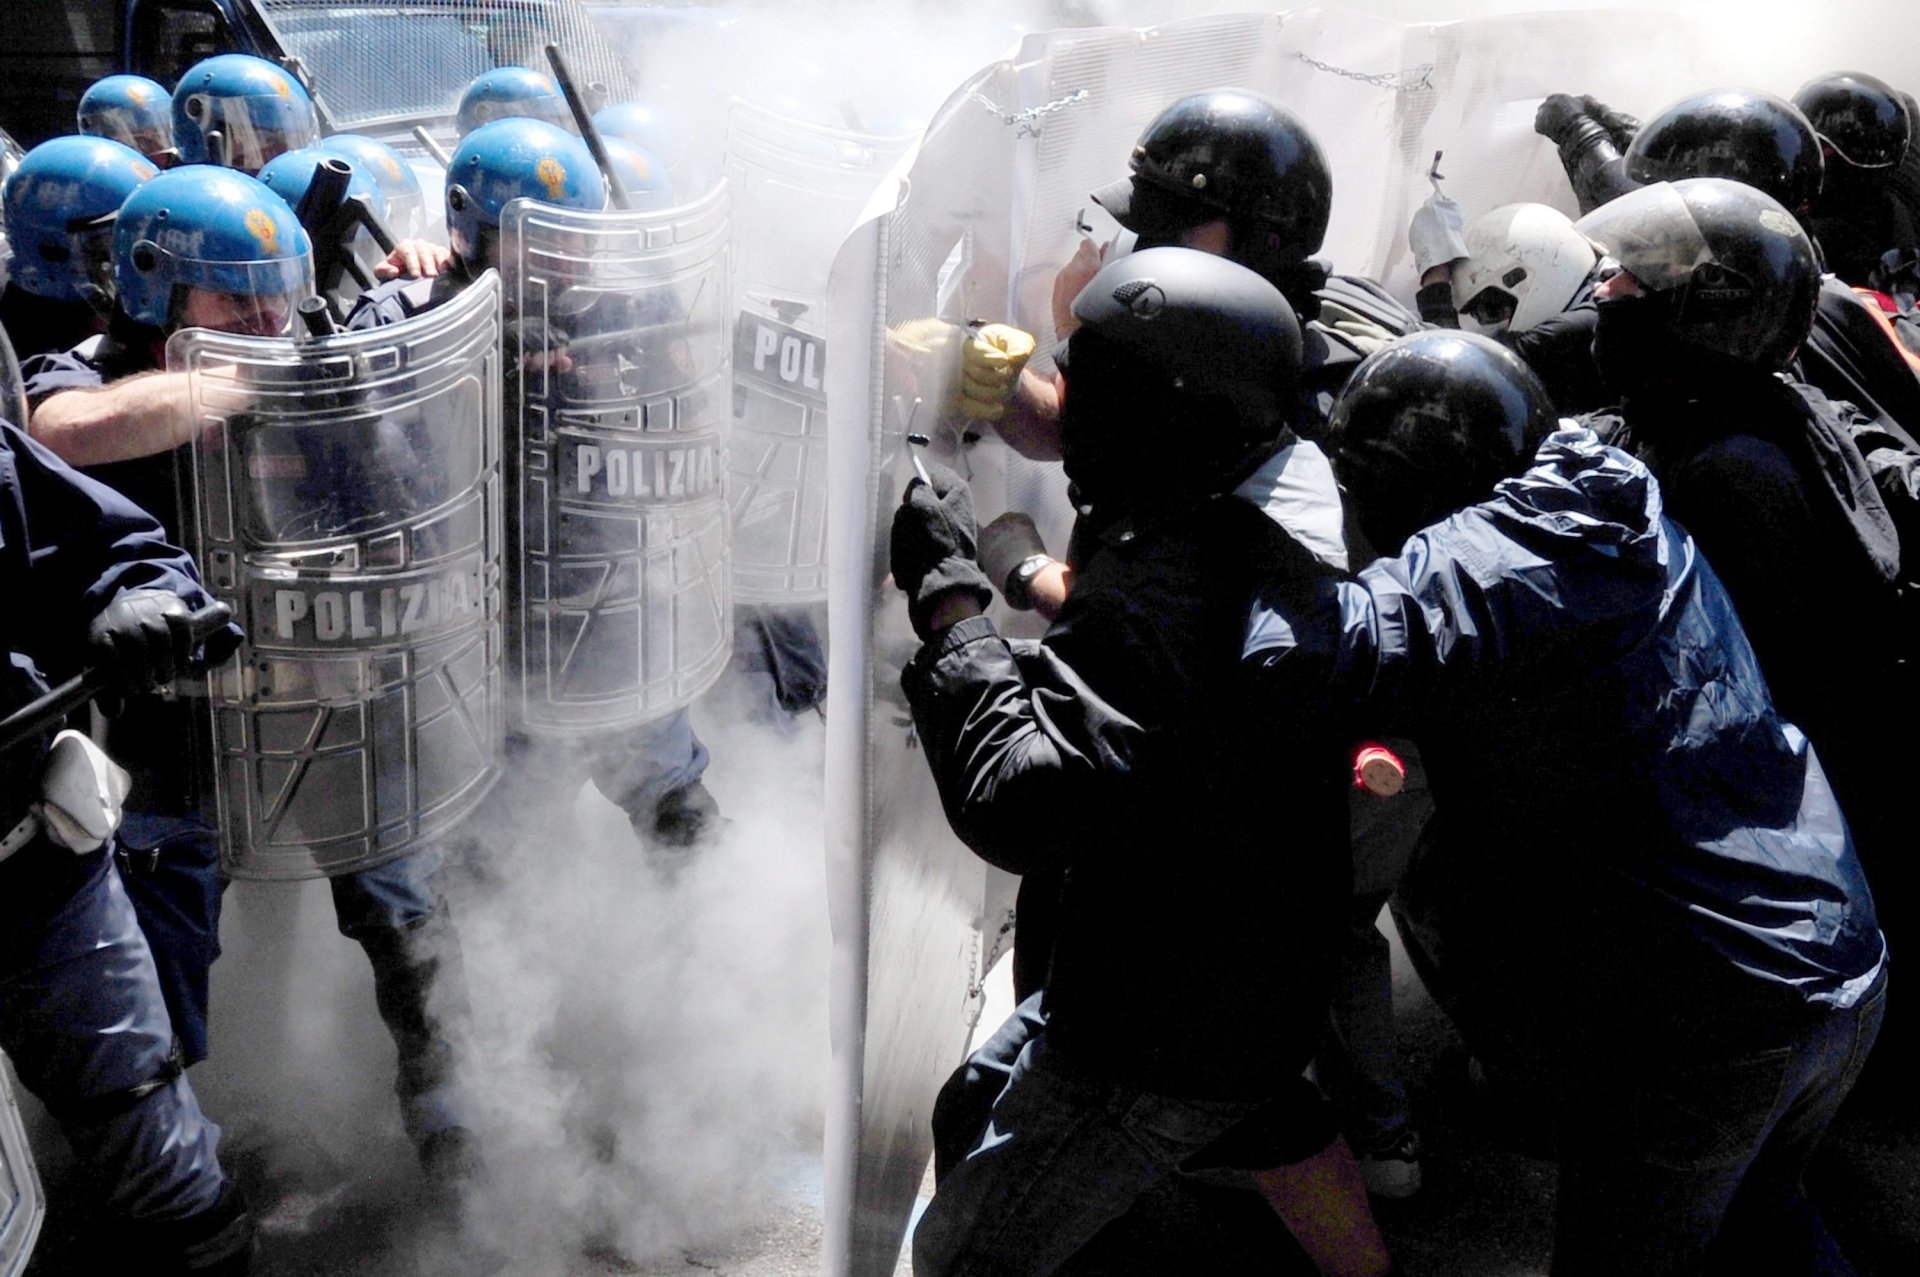 Riot Police HD Wallpaper and Background Image